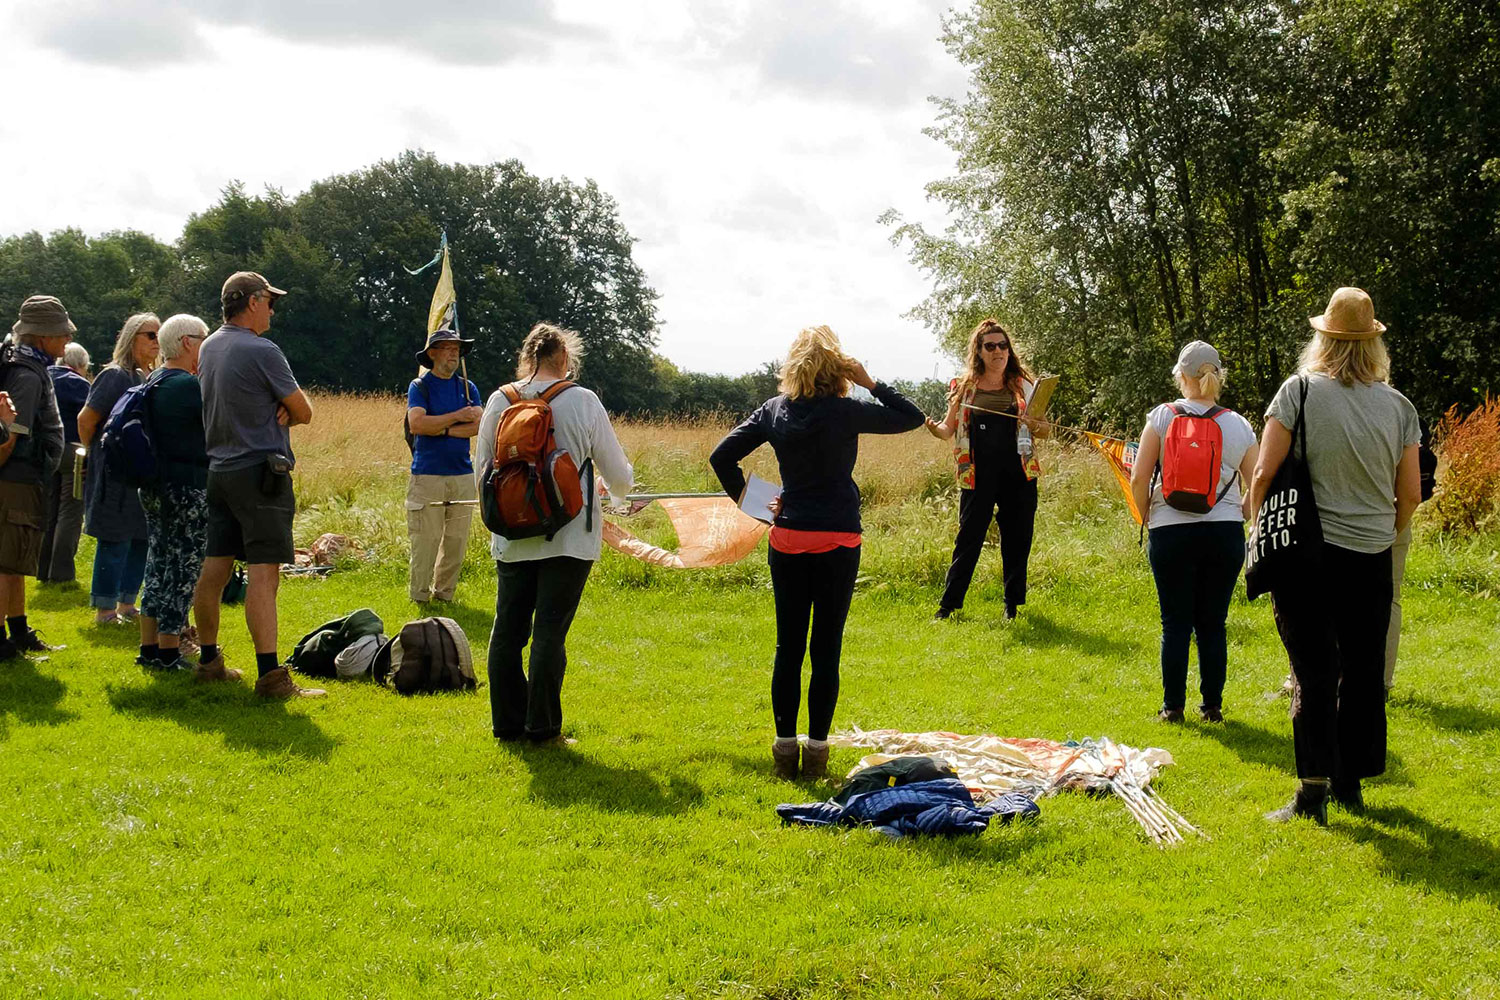 Katie Beadle talks to a circle of walkers stood on grass with trees in the background